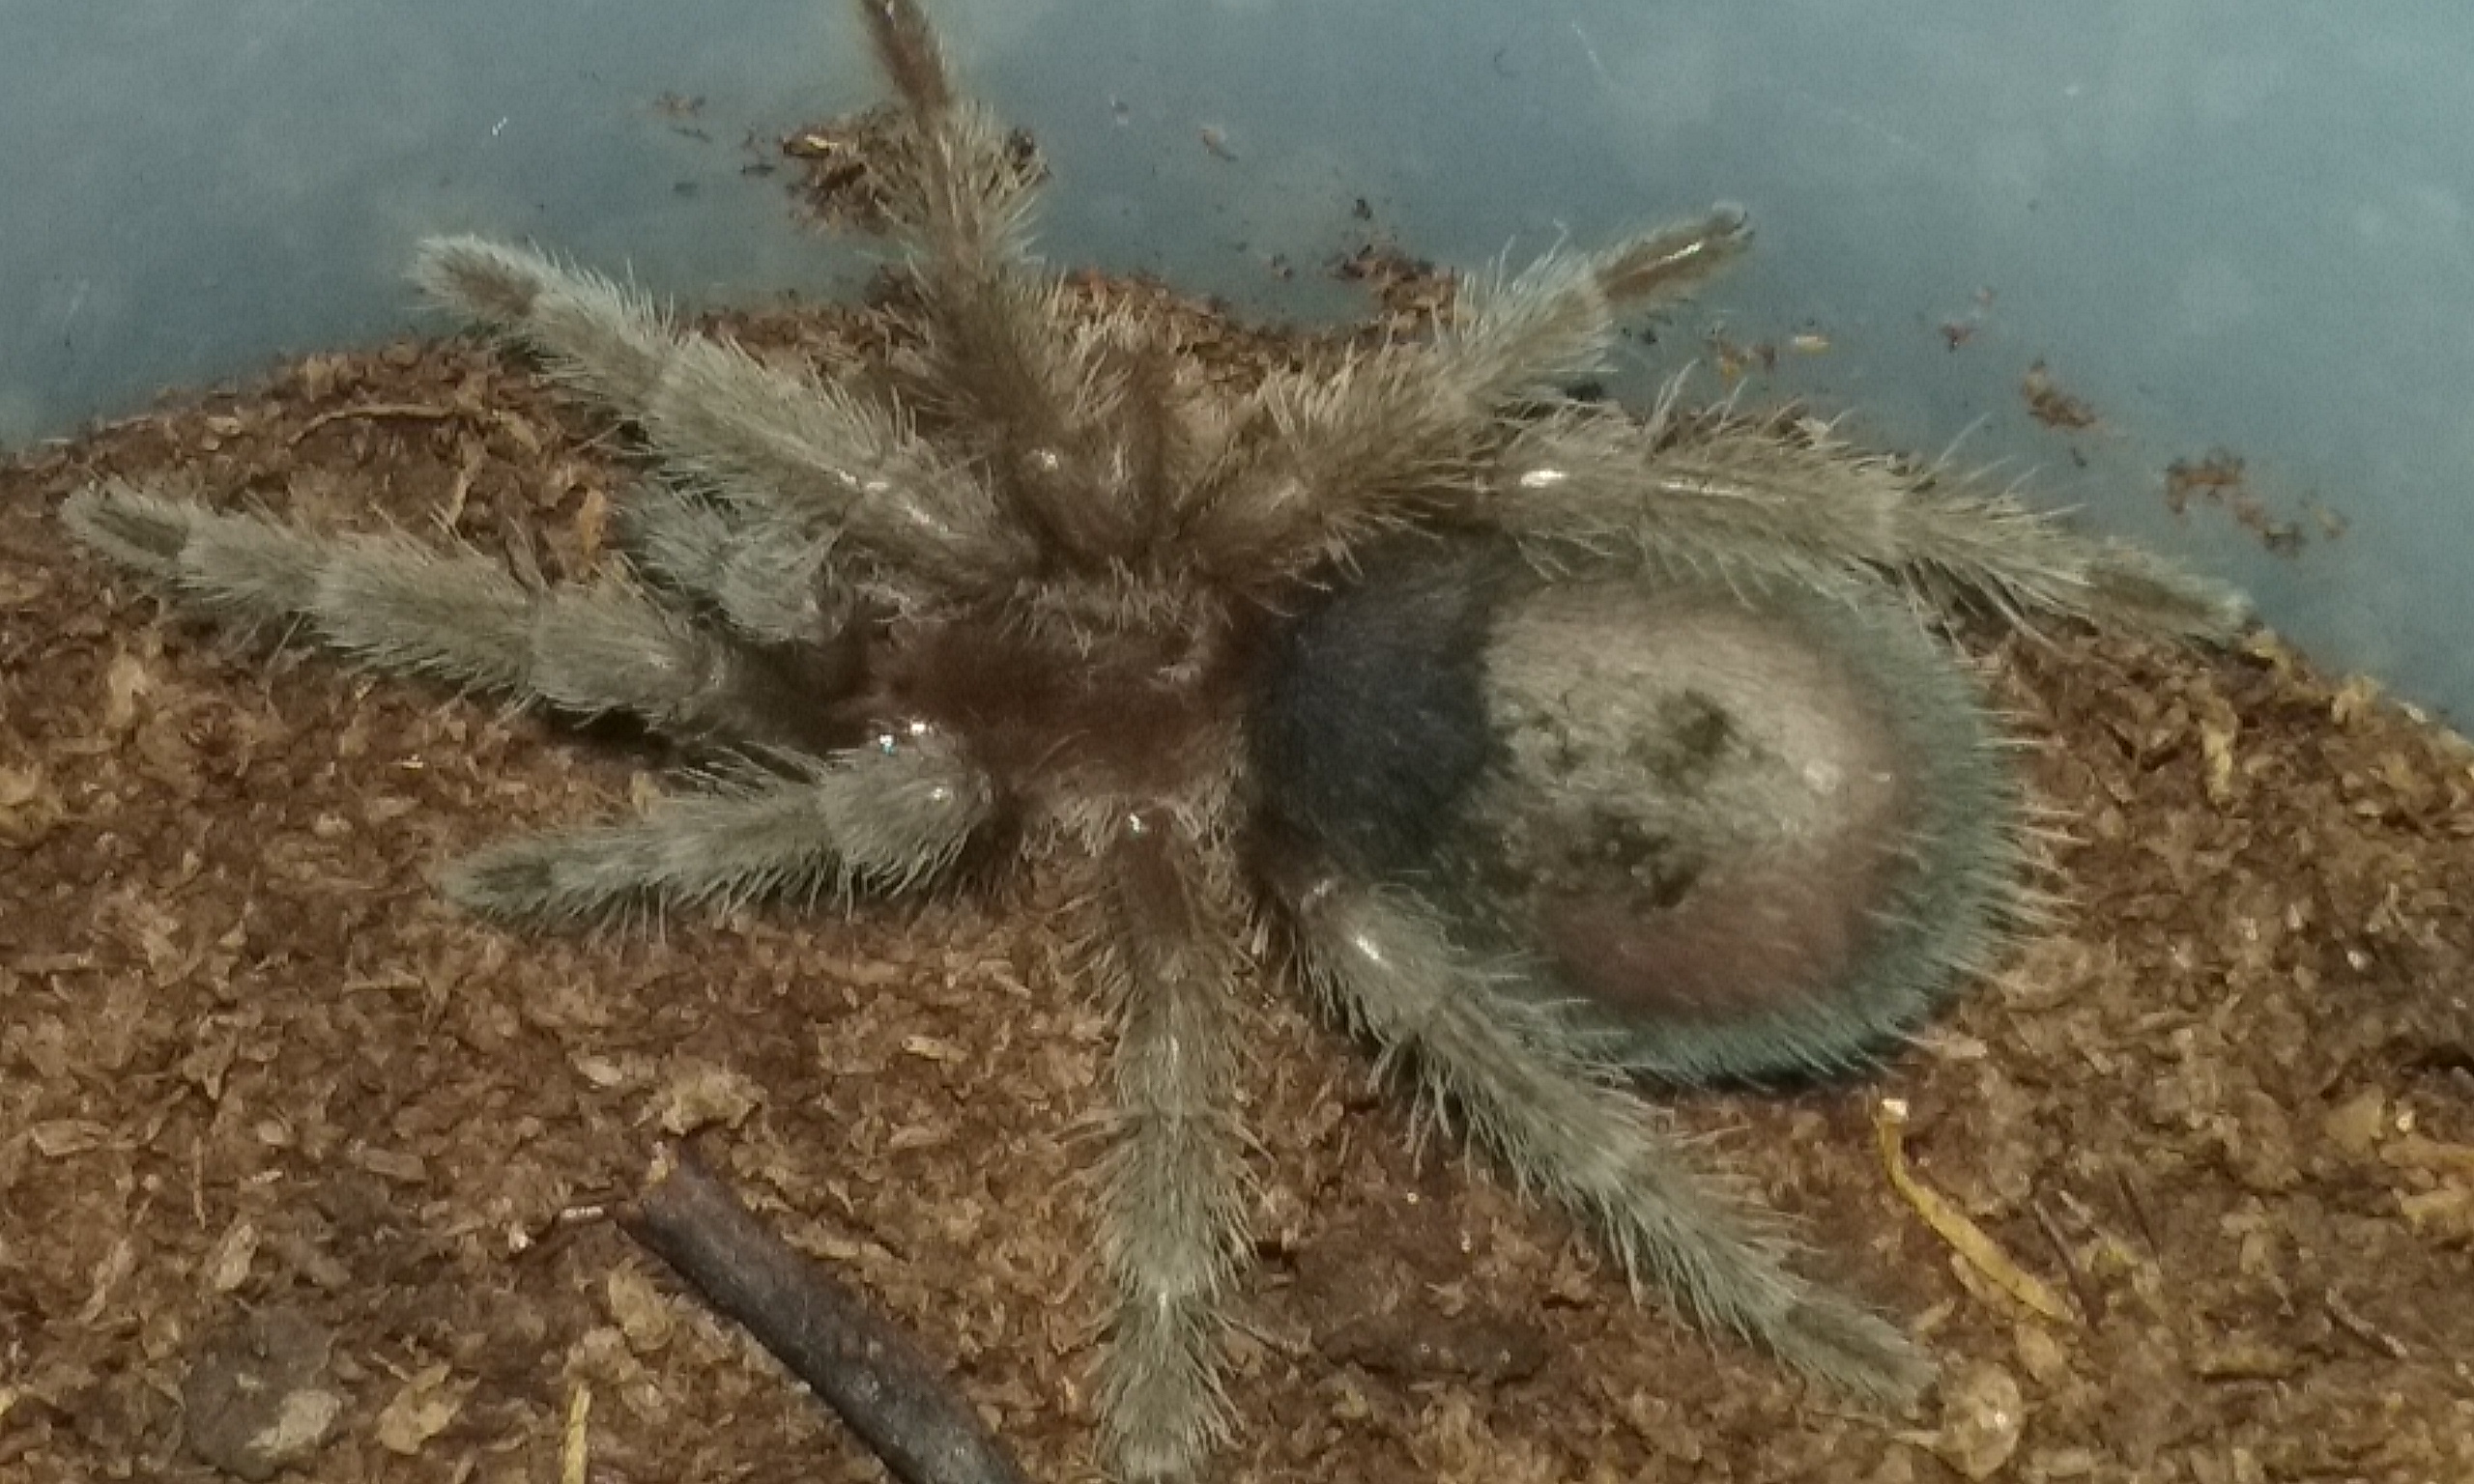 New arrival #2 G. Pulchra